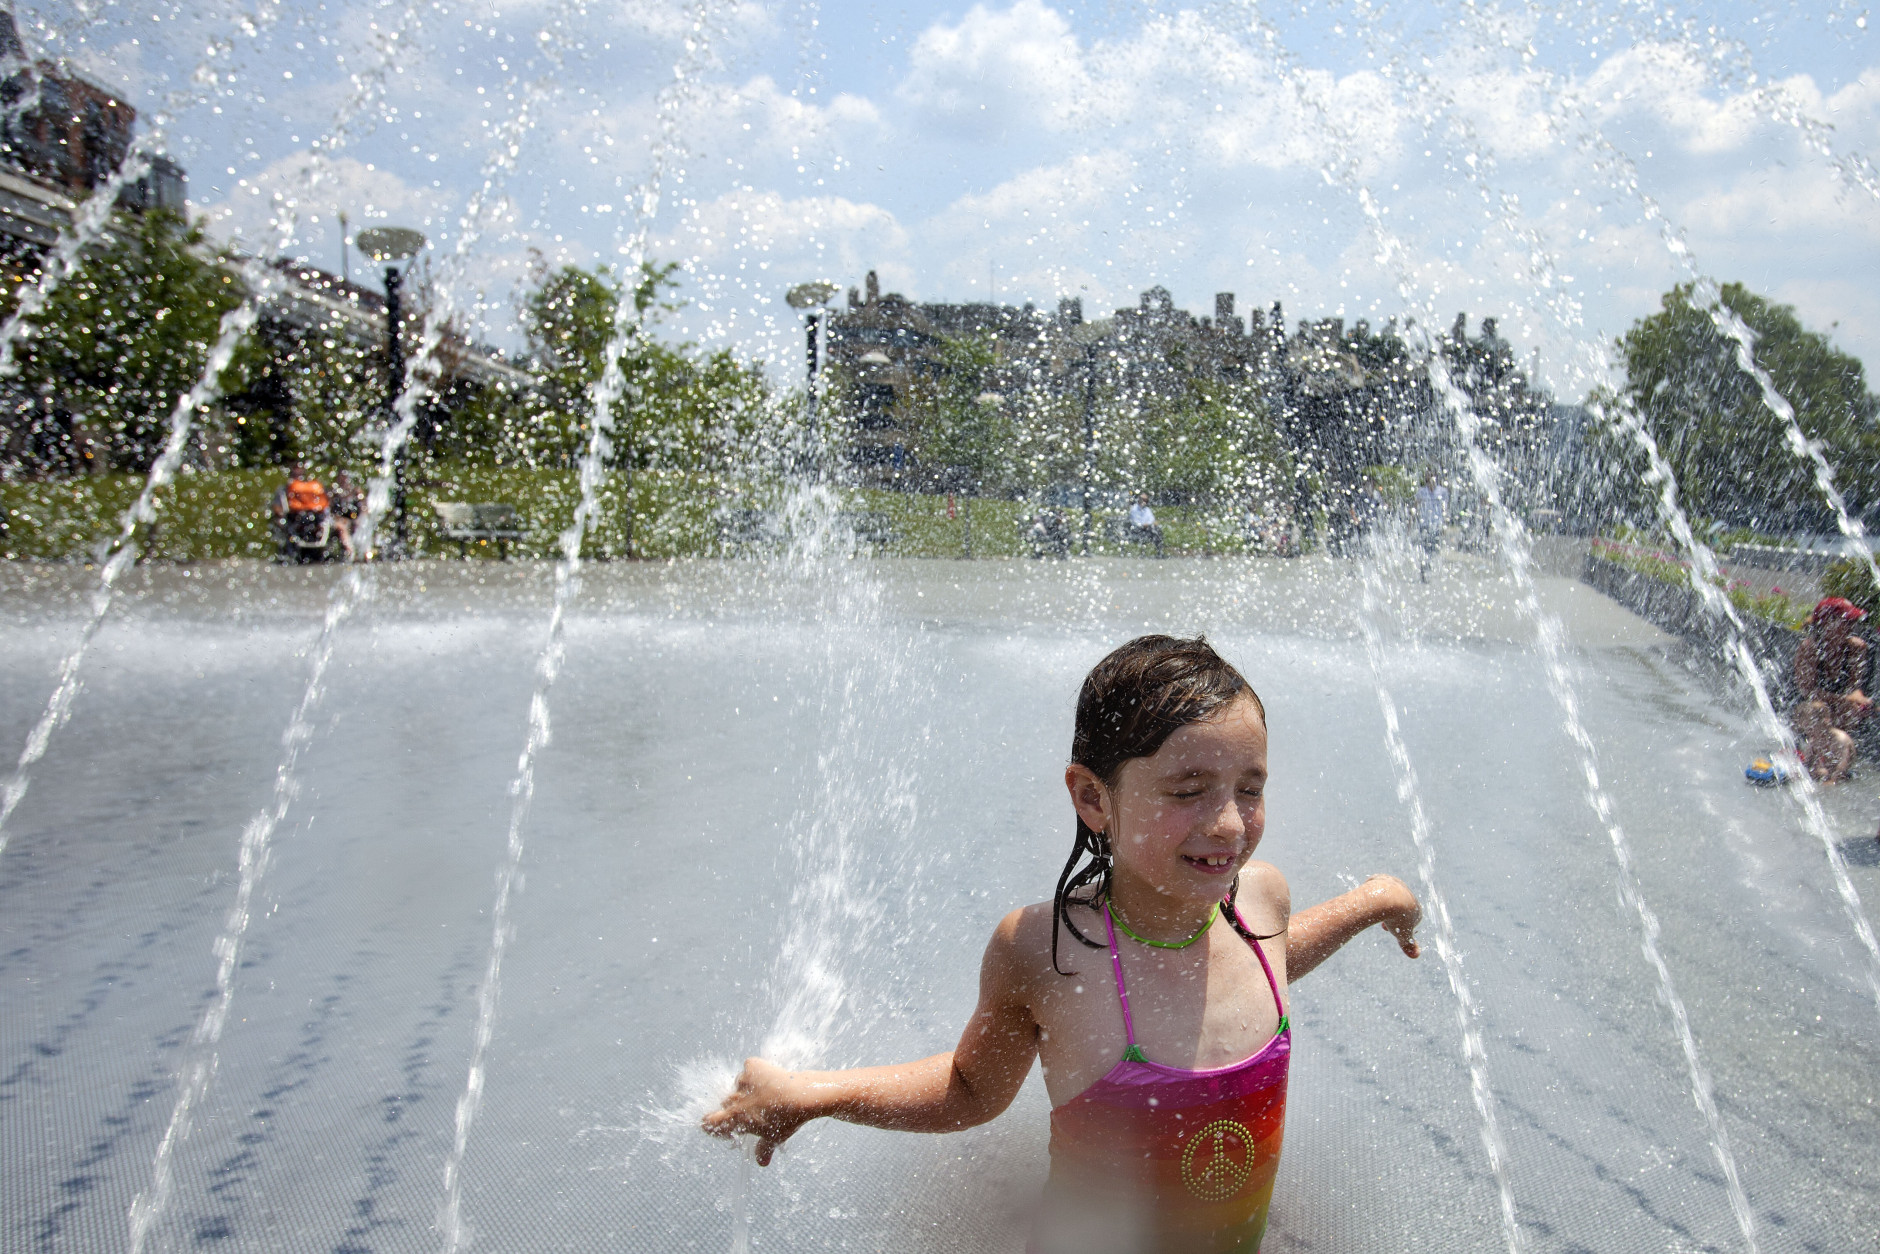 Sophia Tatton, 7, of Washington, cools off  in the fountains at Georgetown Waterfront Park, in Washington, on Wednesday, June 20, 2012. Temperatures across the Northeast are expected to approach triple digits. (AP Photo/Jacquelyn Martin)